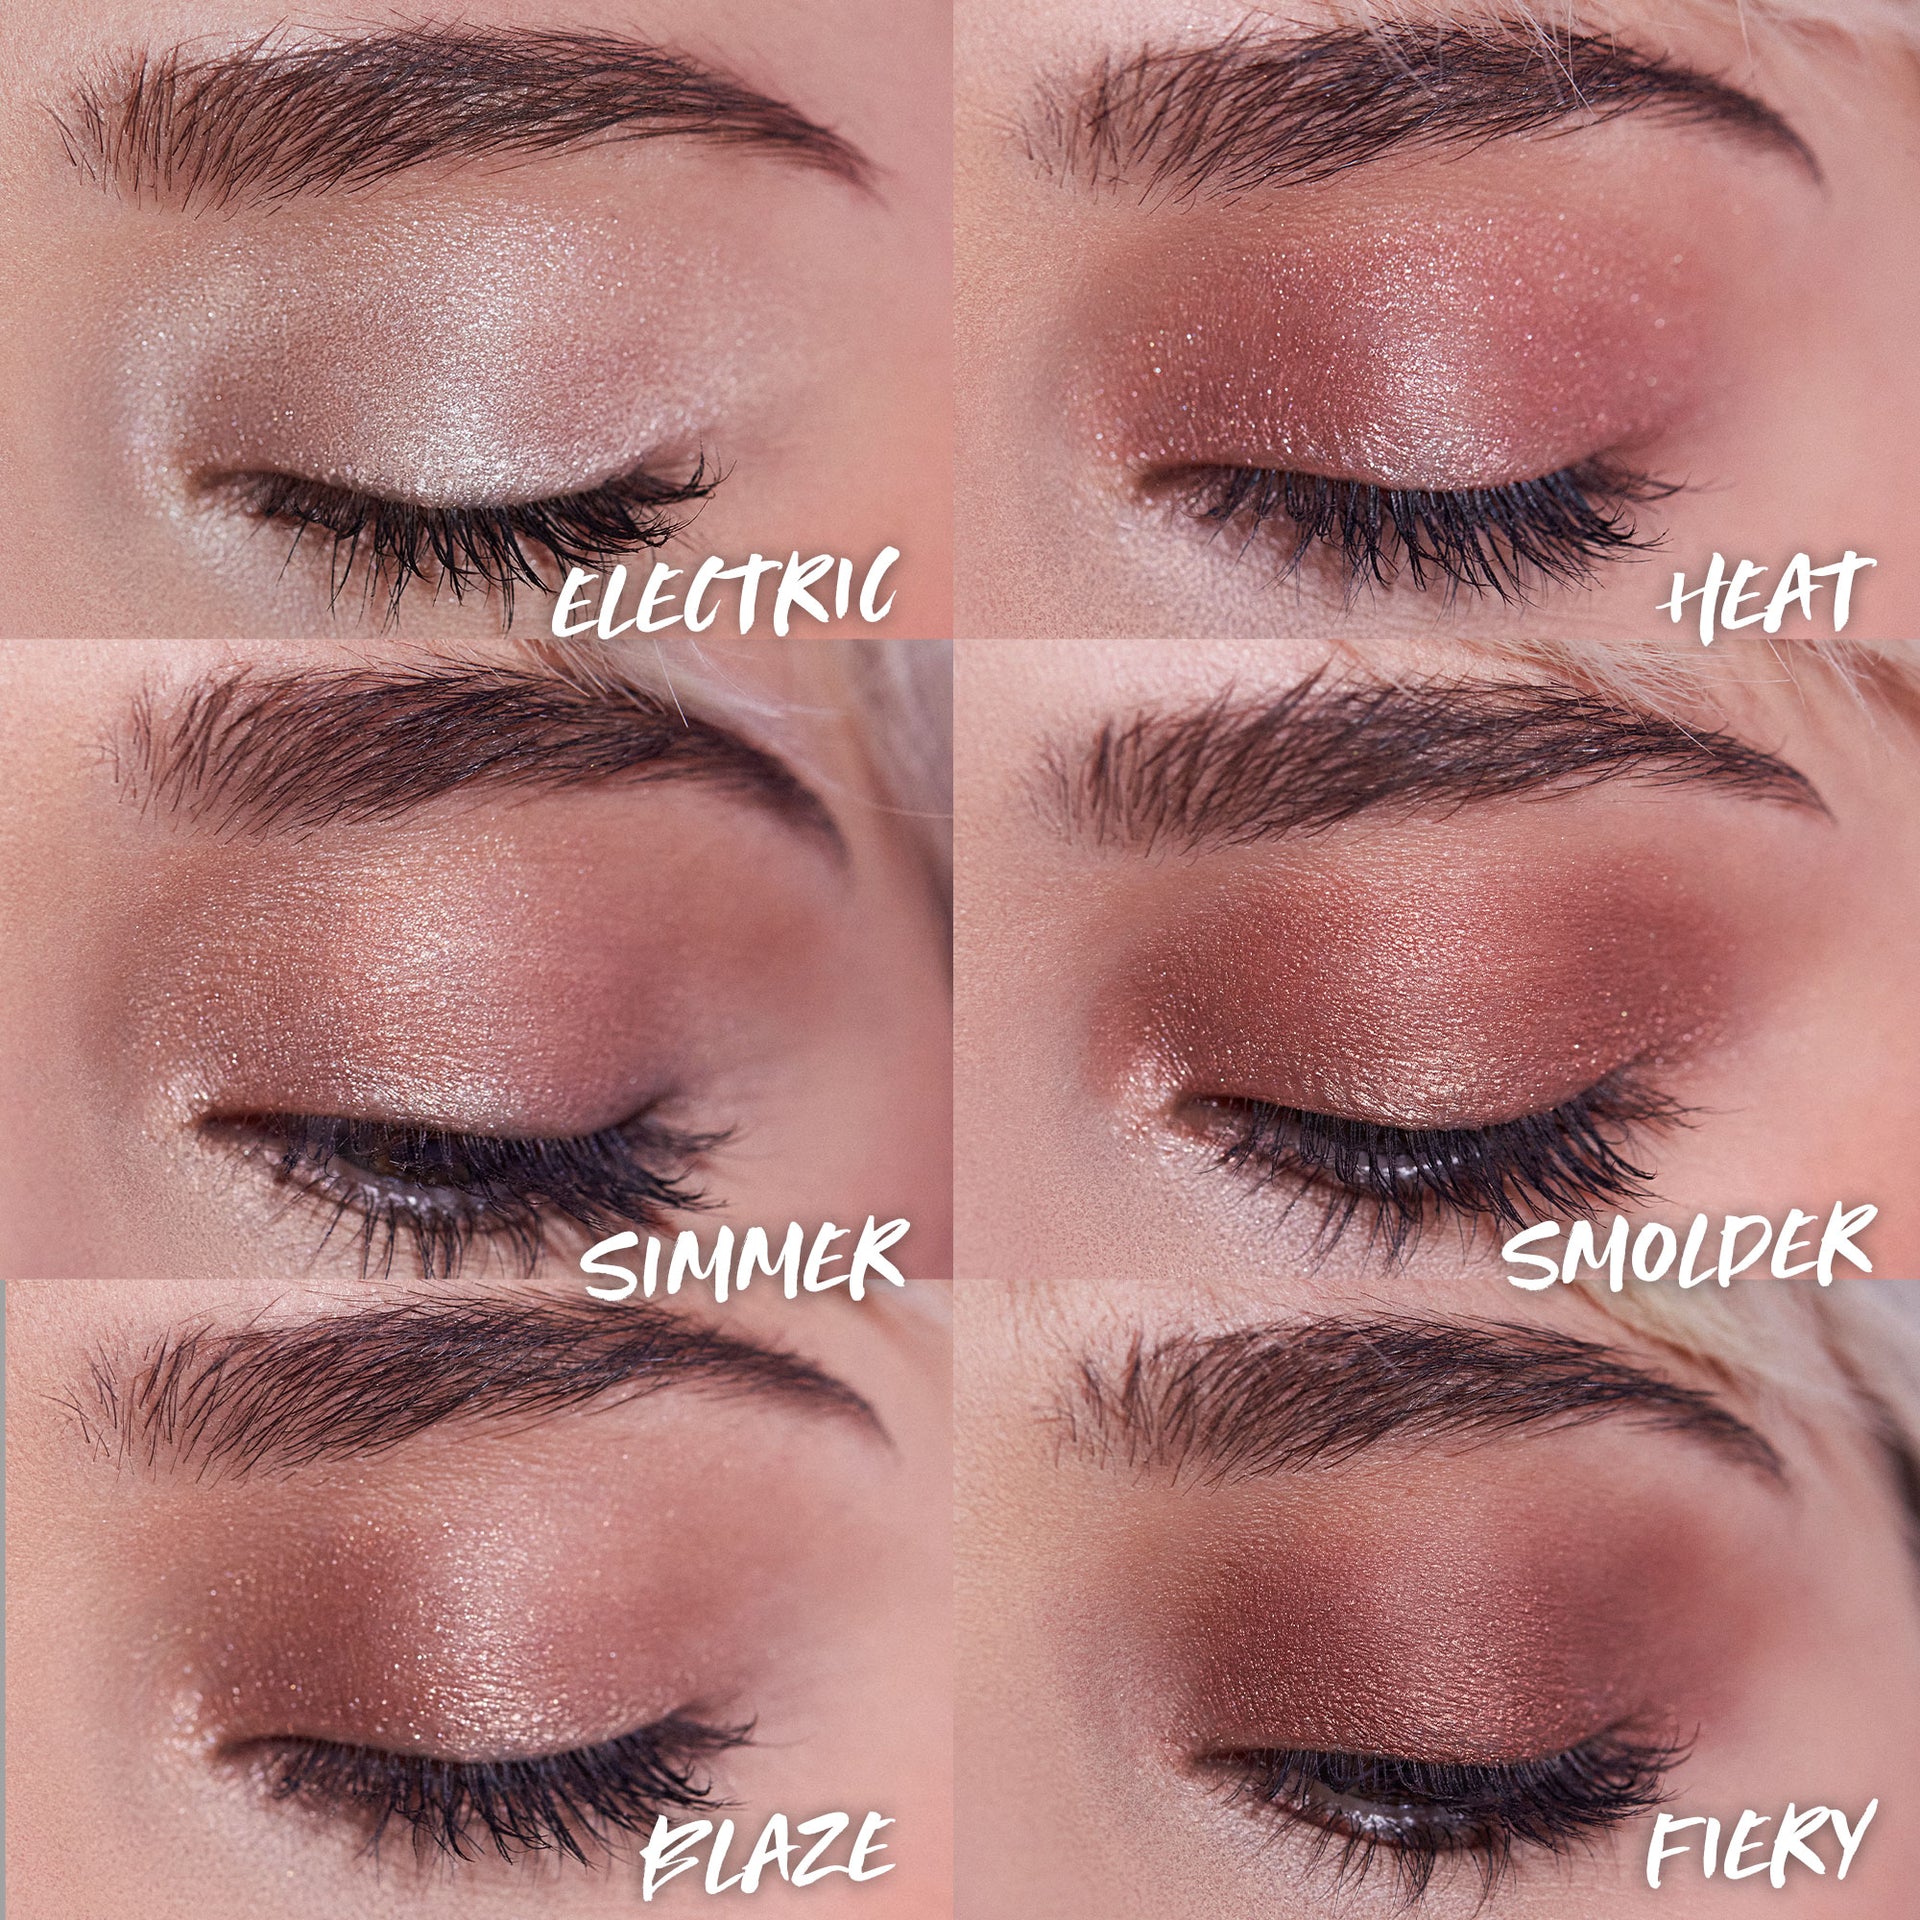 10-second-eye shades when applied